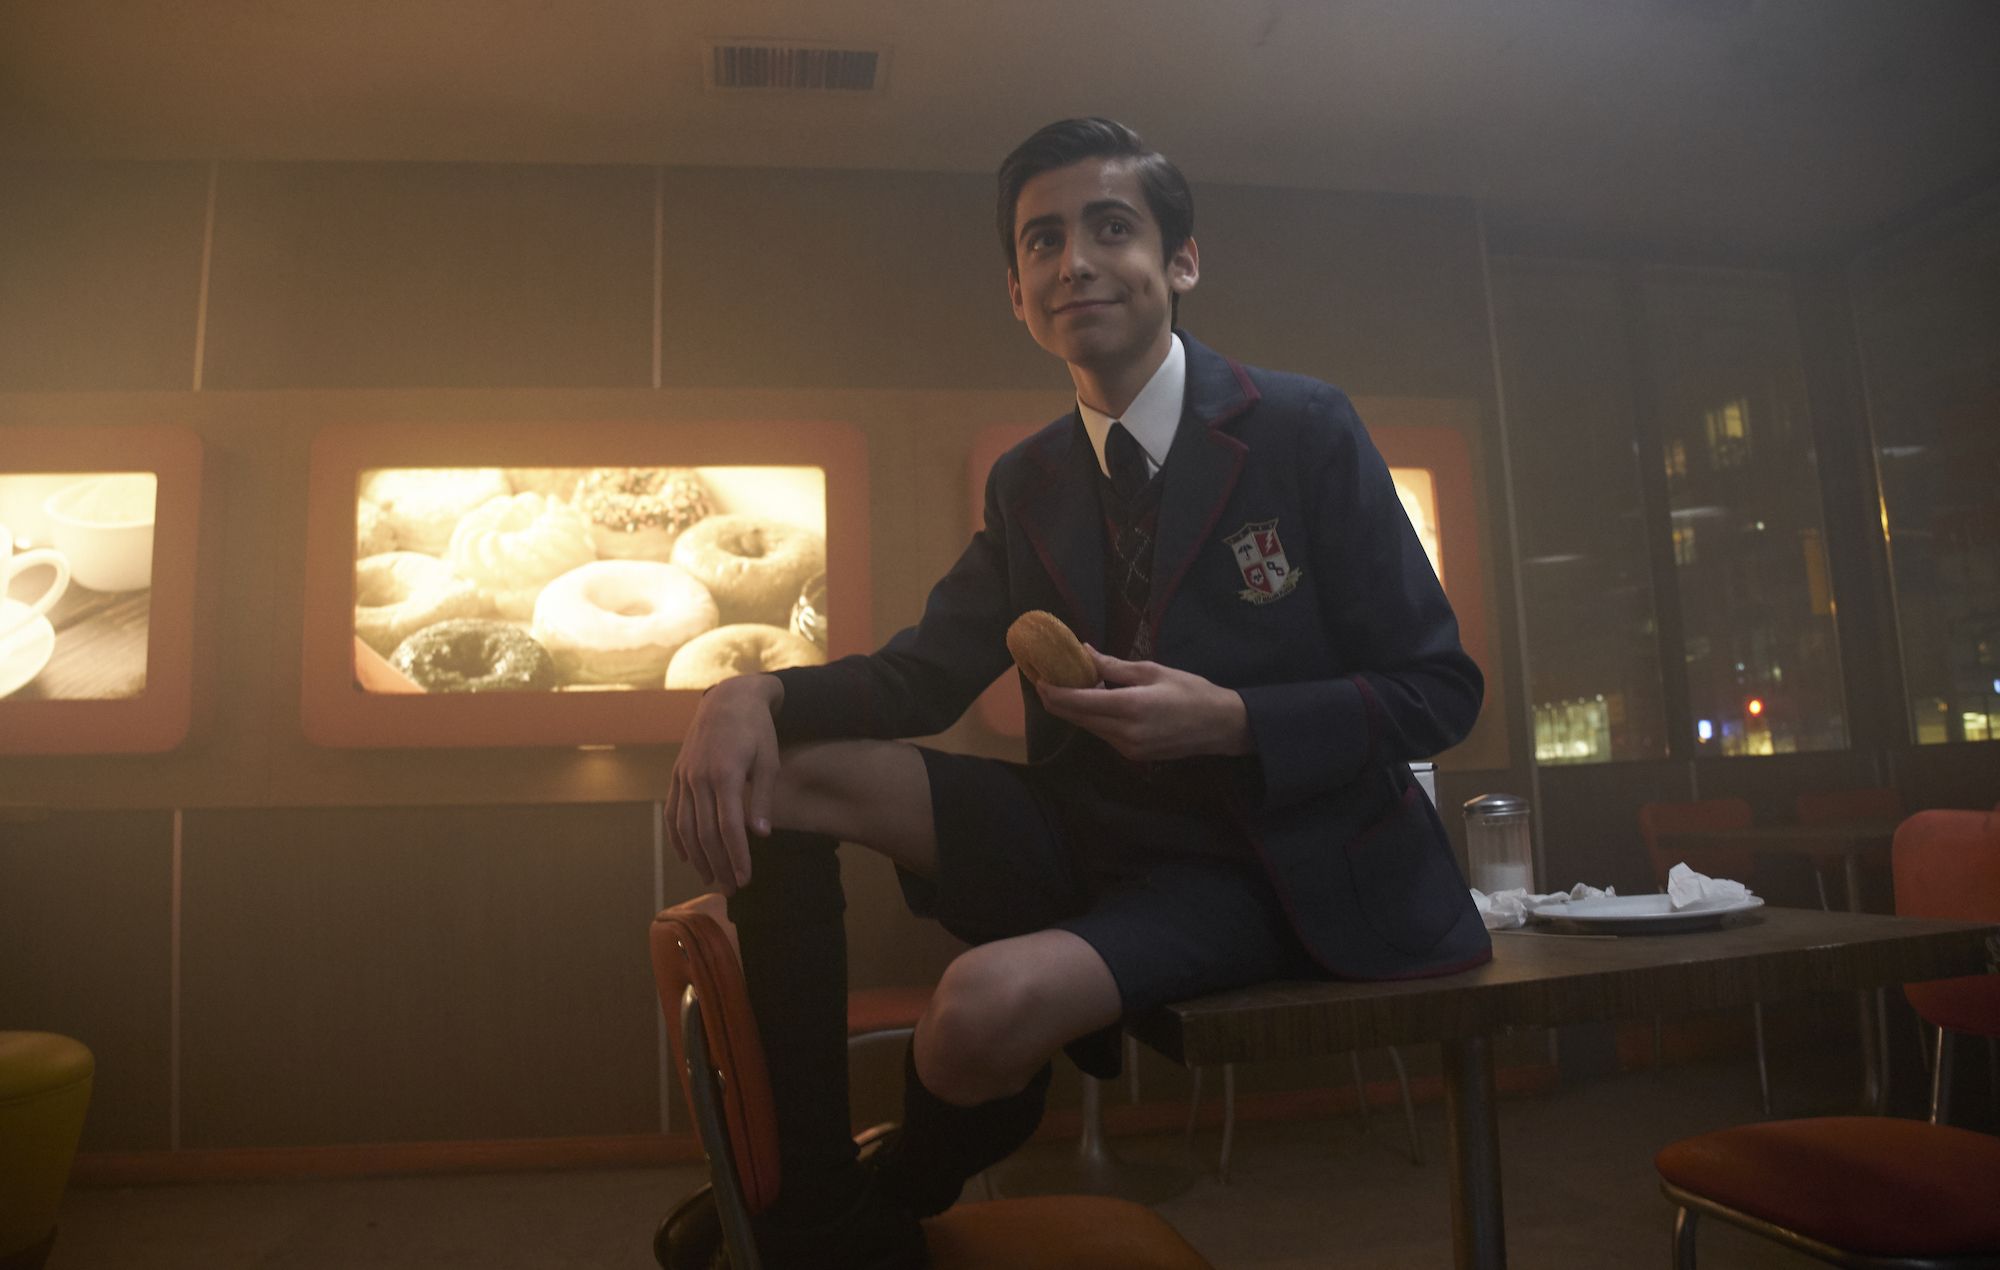 The Umbrella Academy' fans speculate on show's future after Aidan Gallagher's cryptic tweets